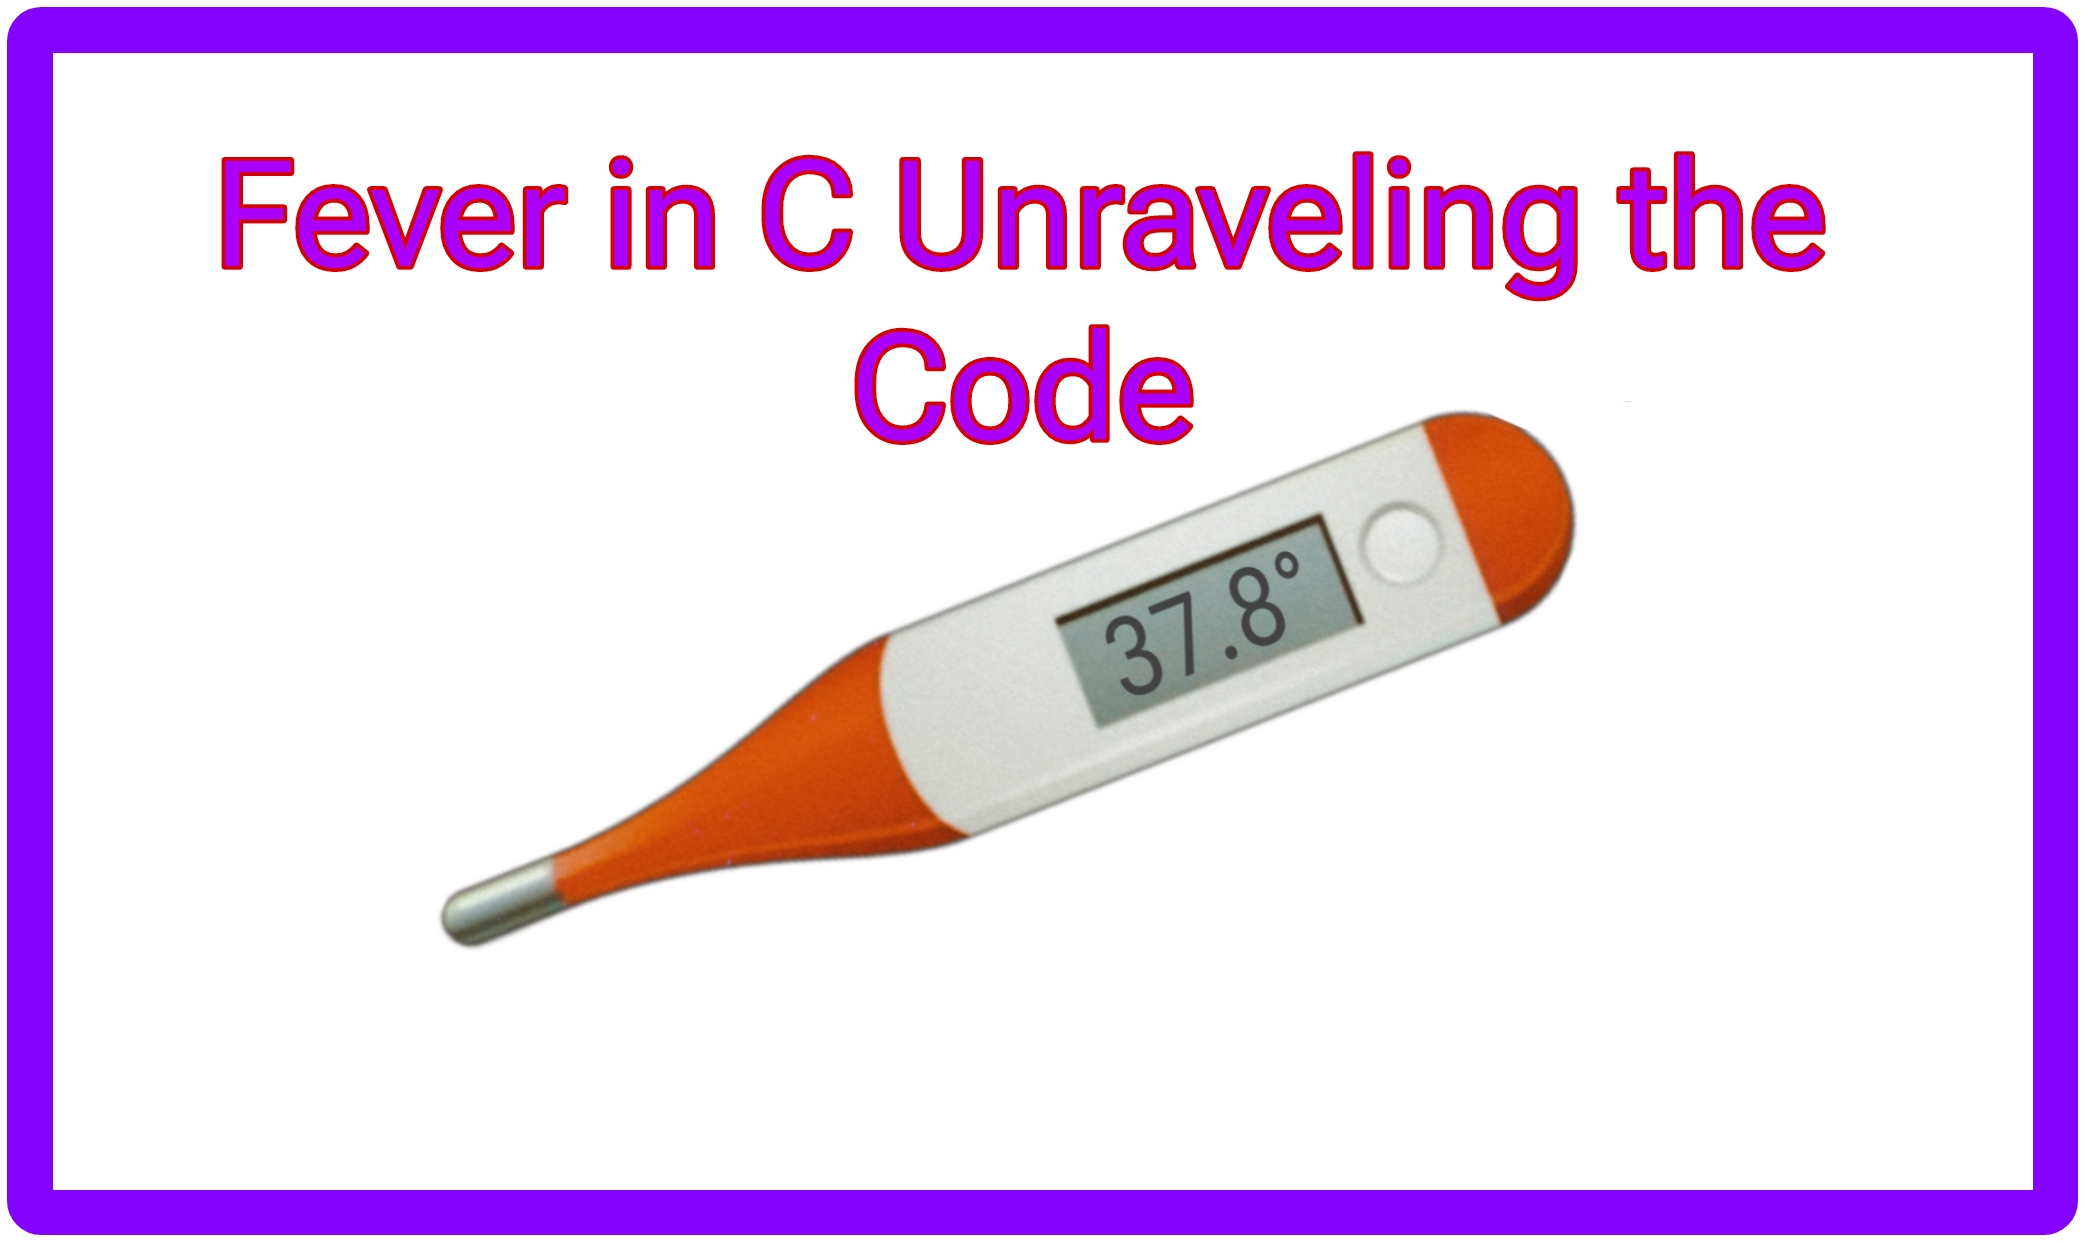 Fever in C - Unraveling the Code